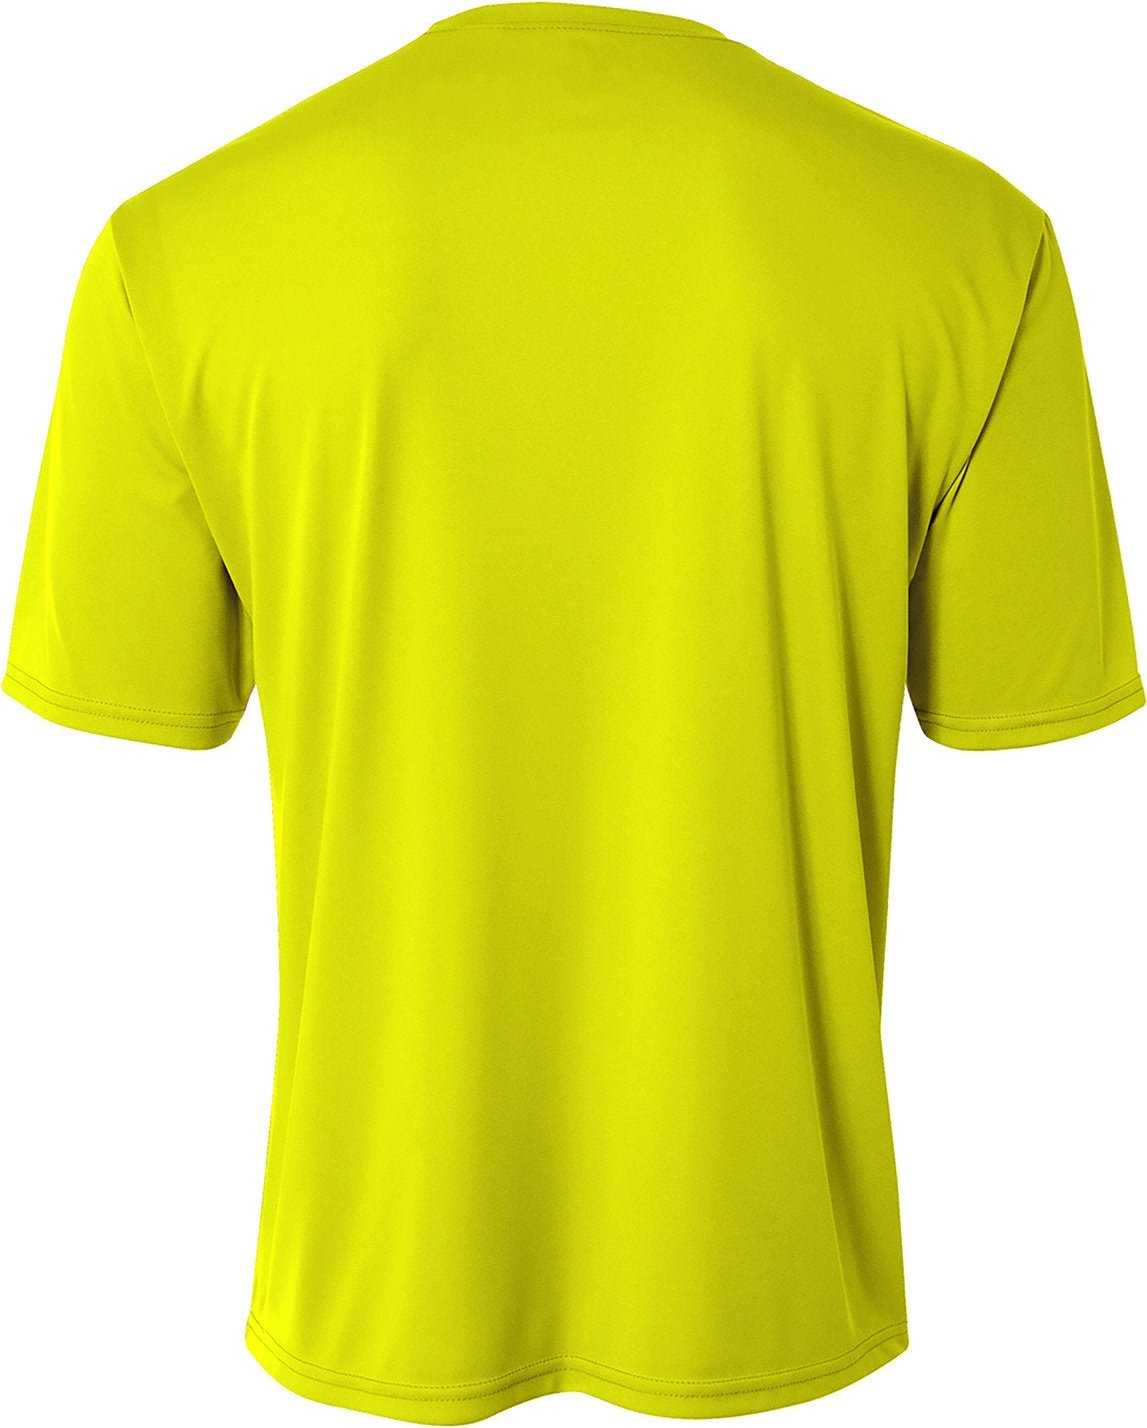 A4 NB3402 Sprint Short Sleeve Youth Tee - Safety Yellow